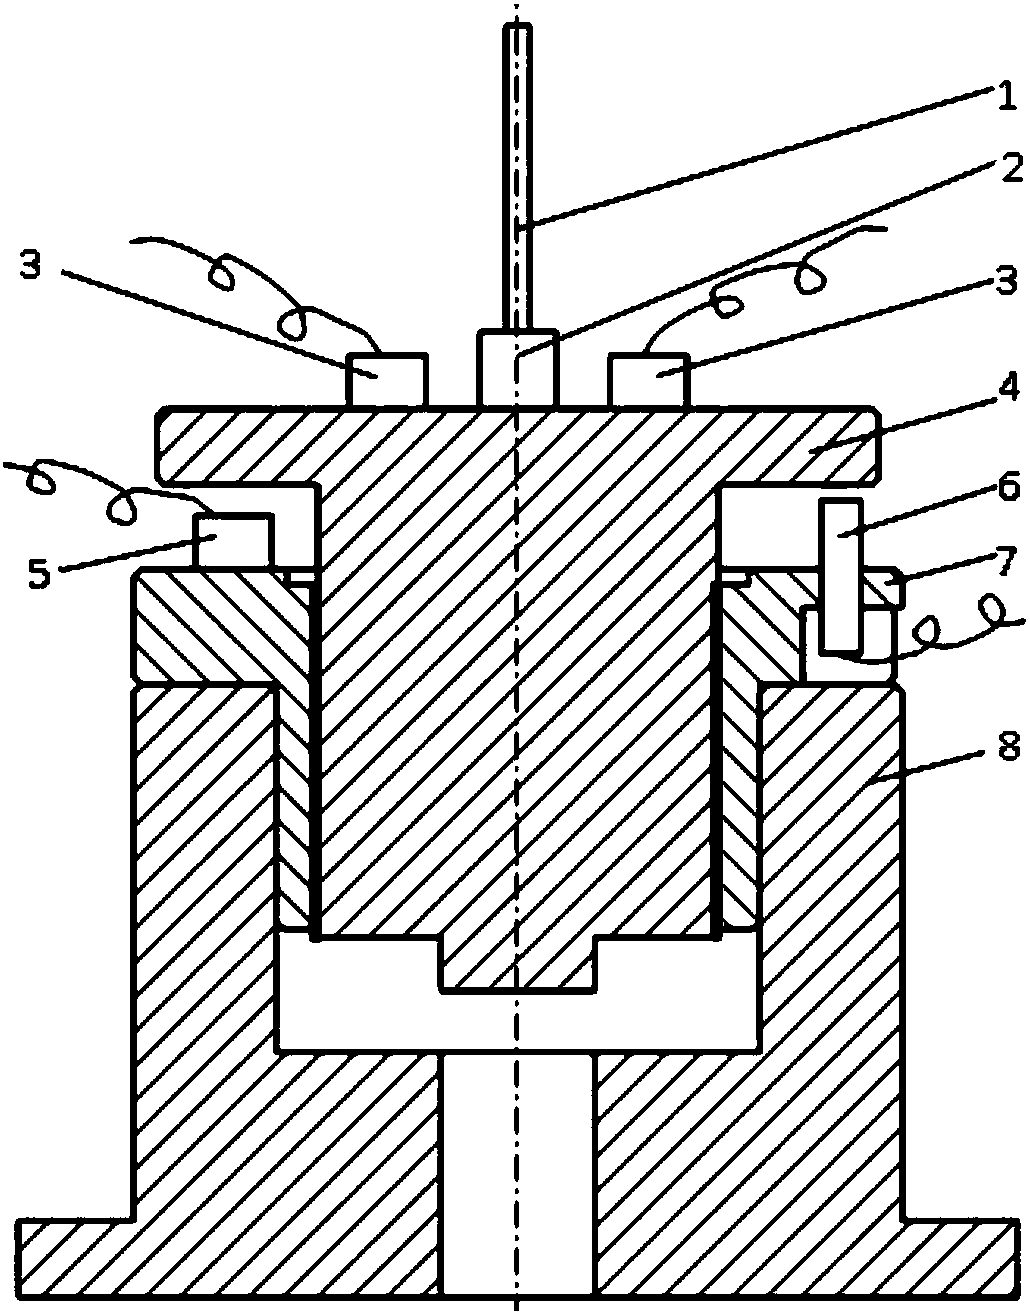 Modular oil film damping test device and method